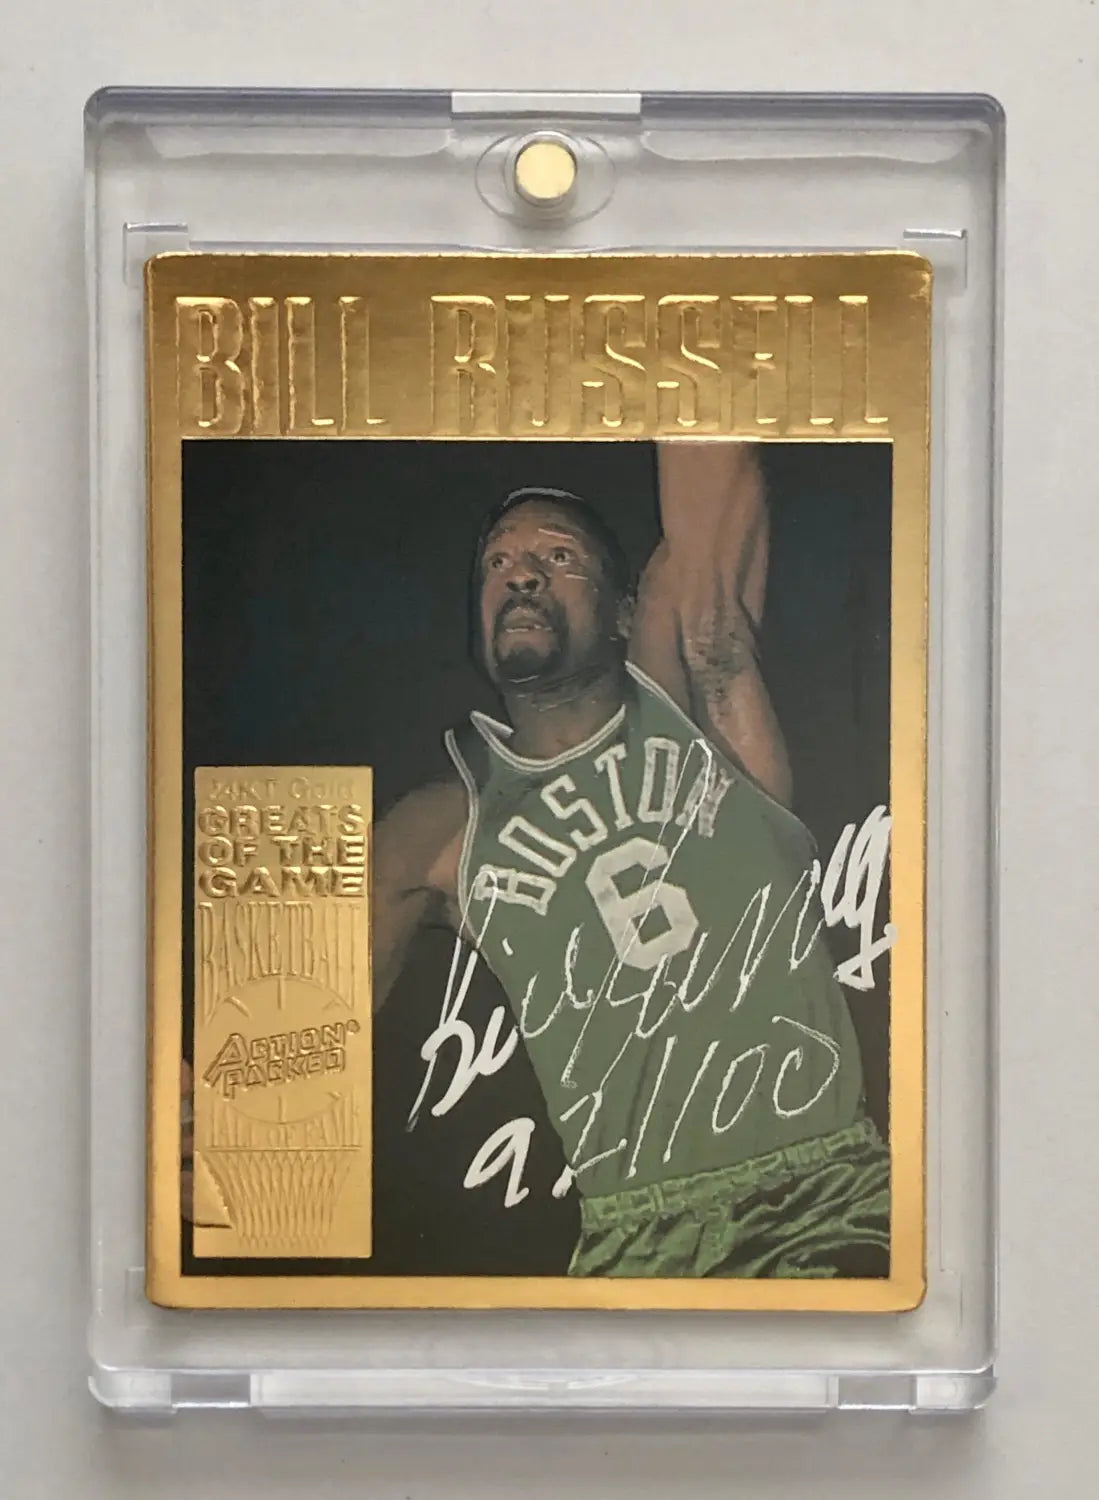 1995 Action Packed Bill Russell Autographed Card #D1/100 Beckett